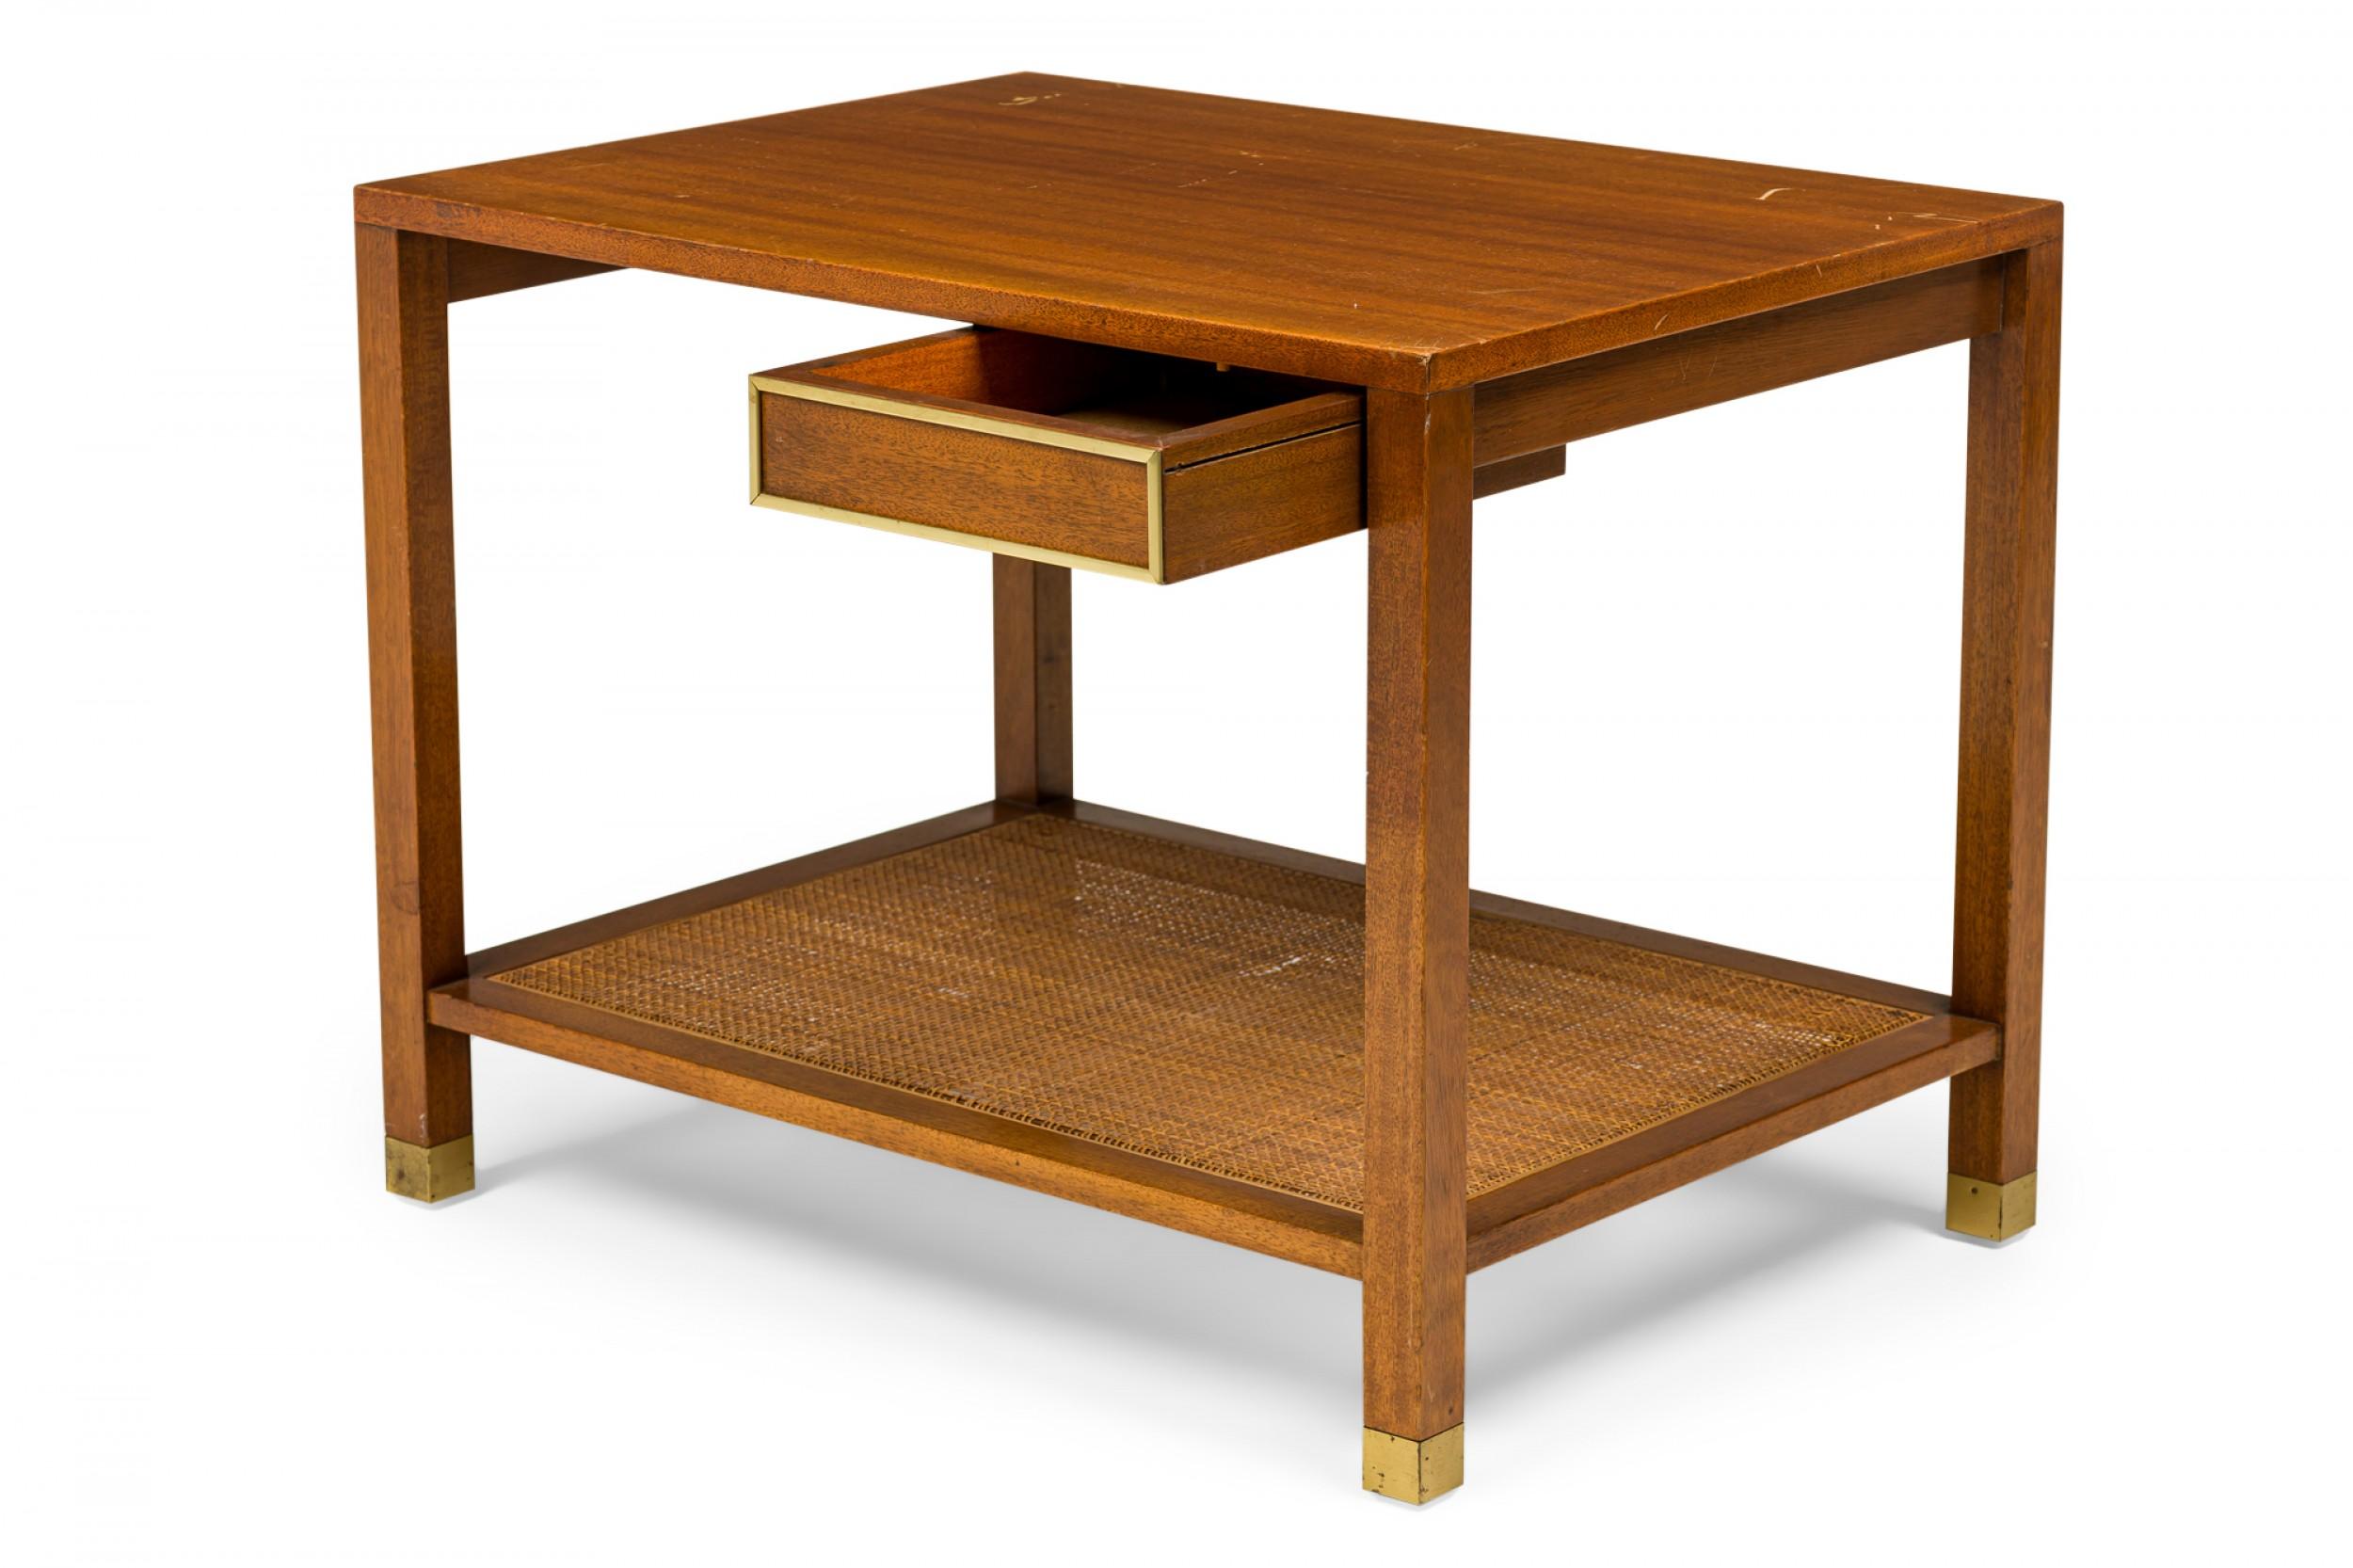 20th Century Harvey Probber Parsons-Style Wooden Caned Shelf End / Side Table For Sale